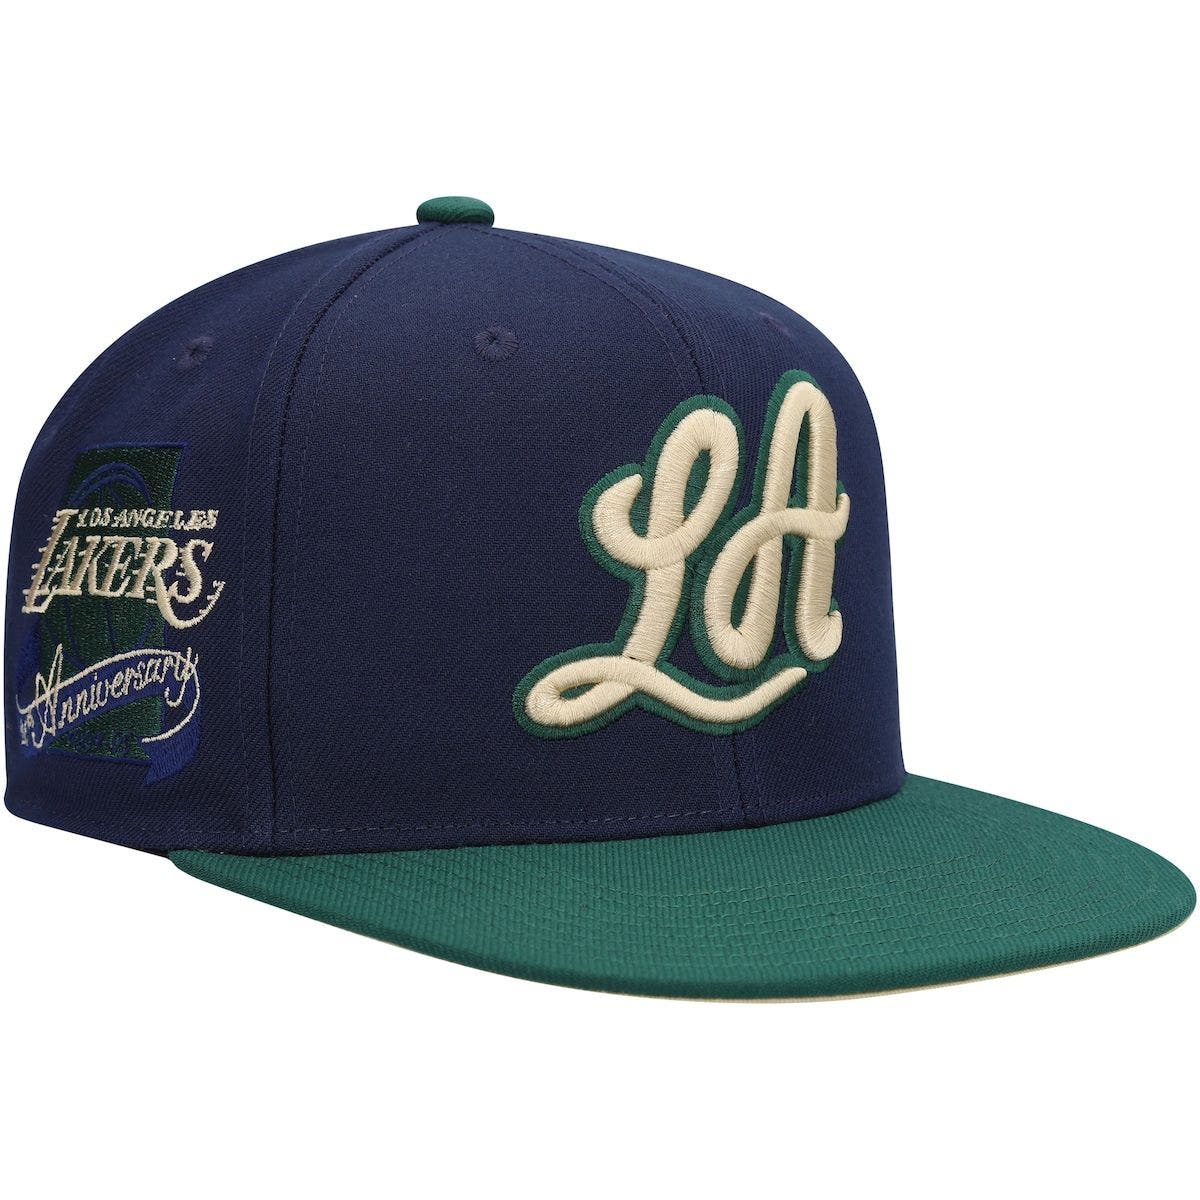 Men's Mitchell & Ness Navy/Green Los Angeles Lakers 35th Anniversary  Hardwood Classics Grassland Fitted Hat